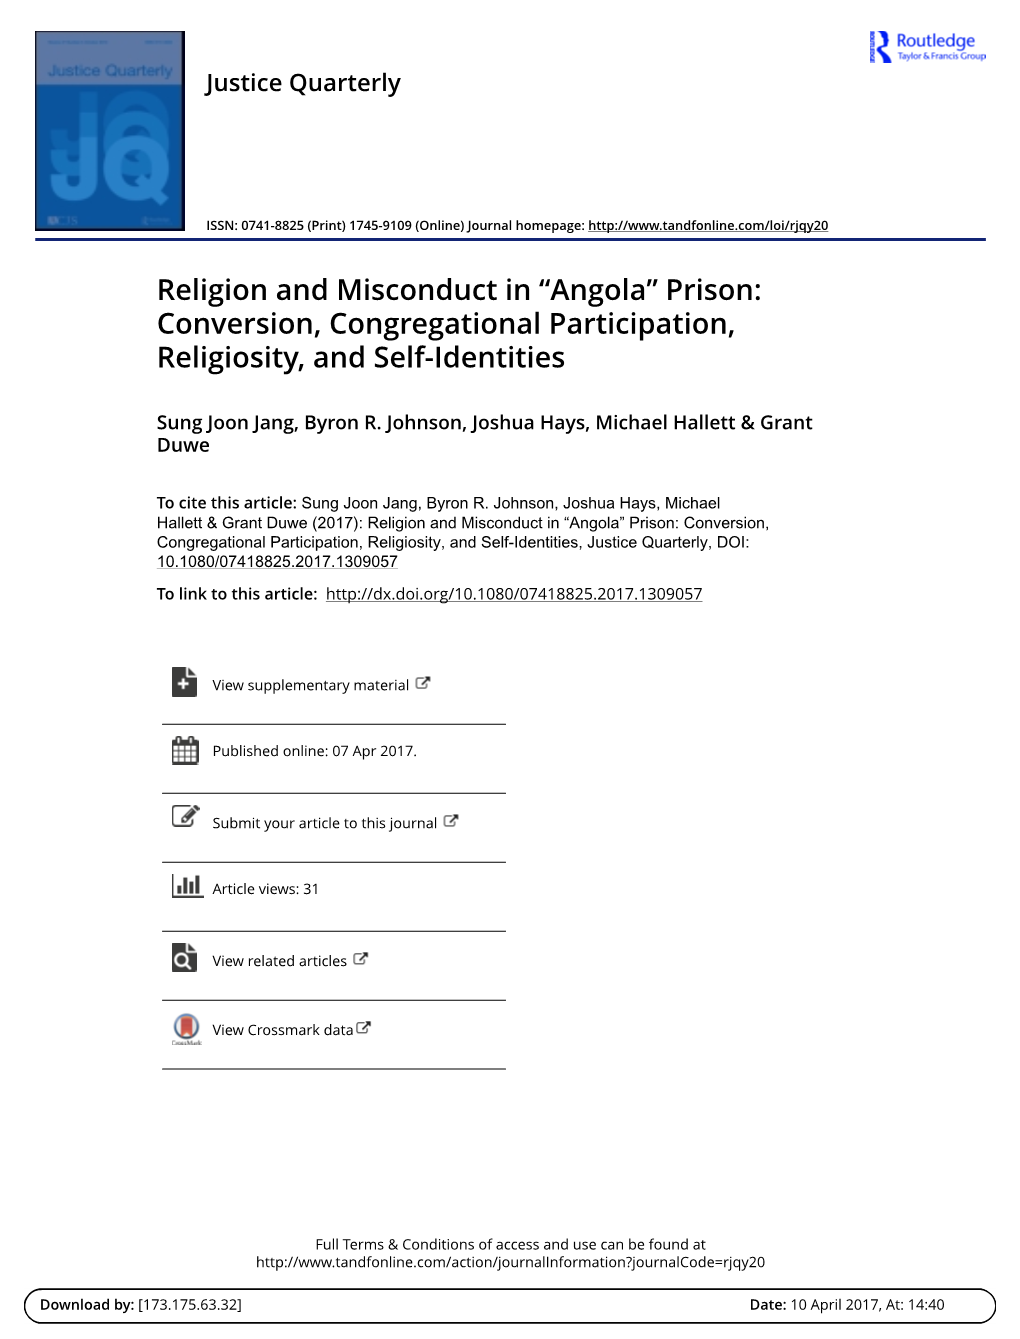 Religion and Misconduct in “Angola” Prison: Conversion, Congregational Participation, Religiosity, and Self-Identities